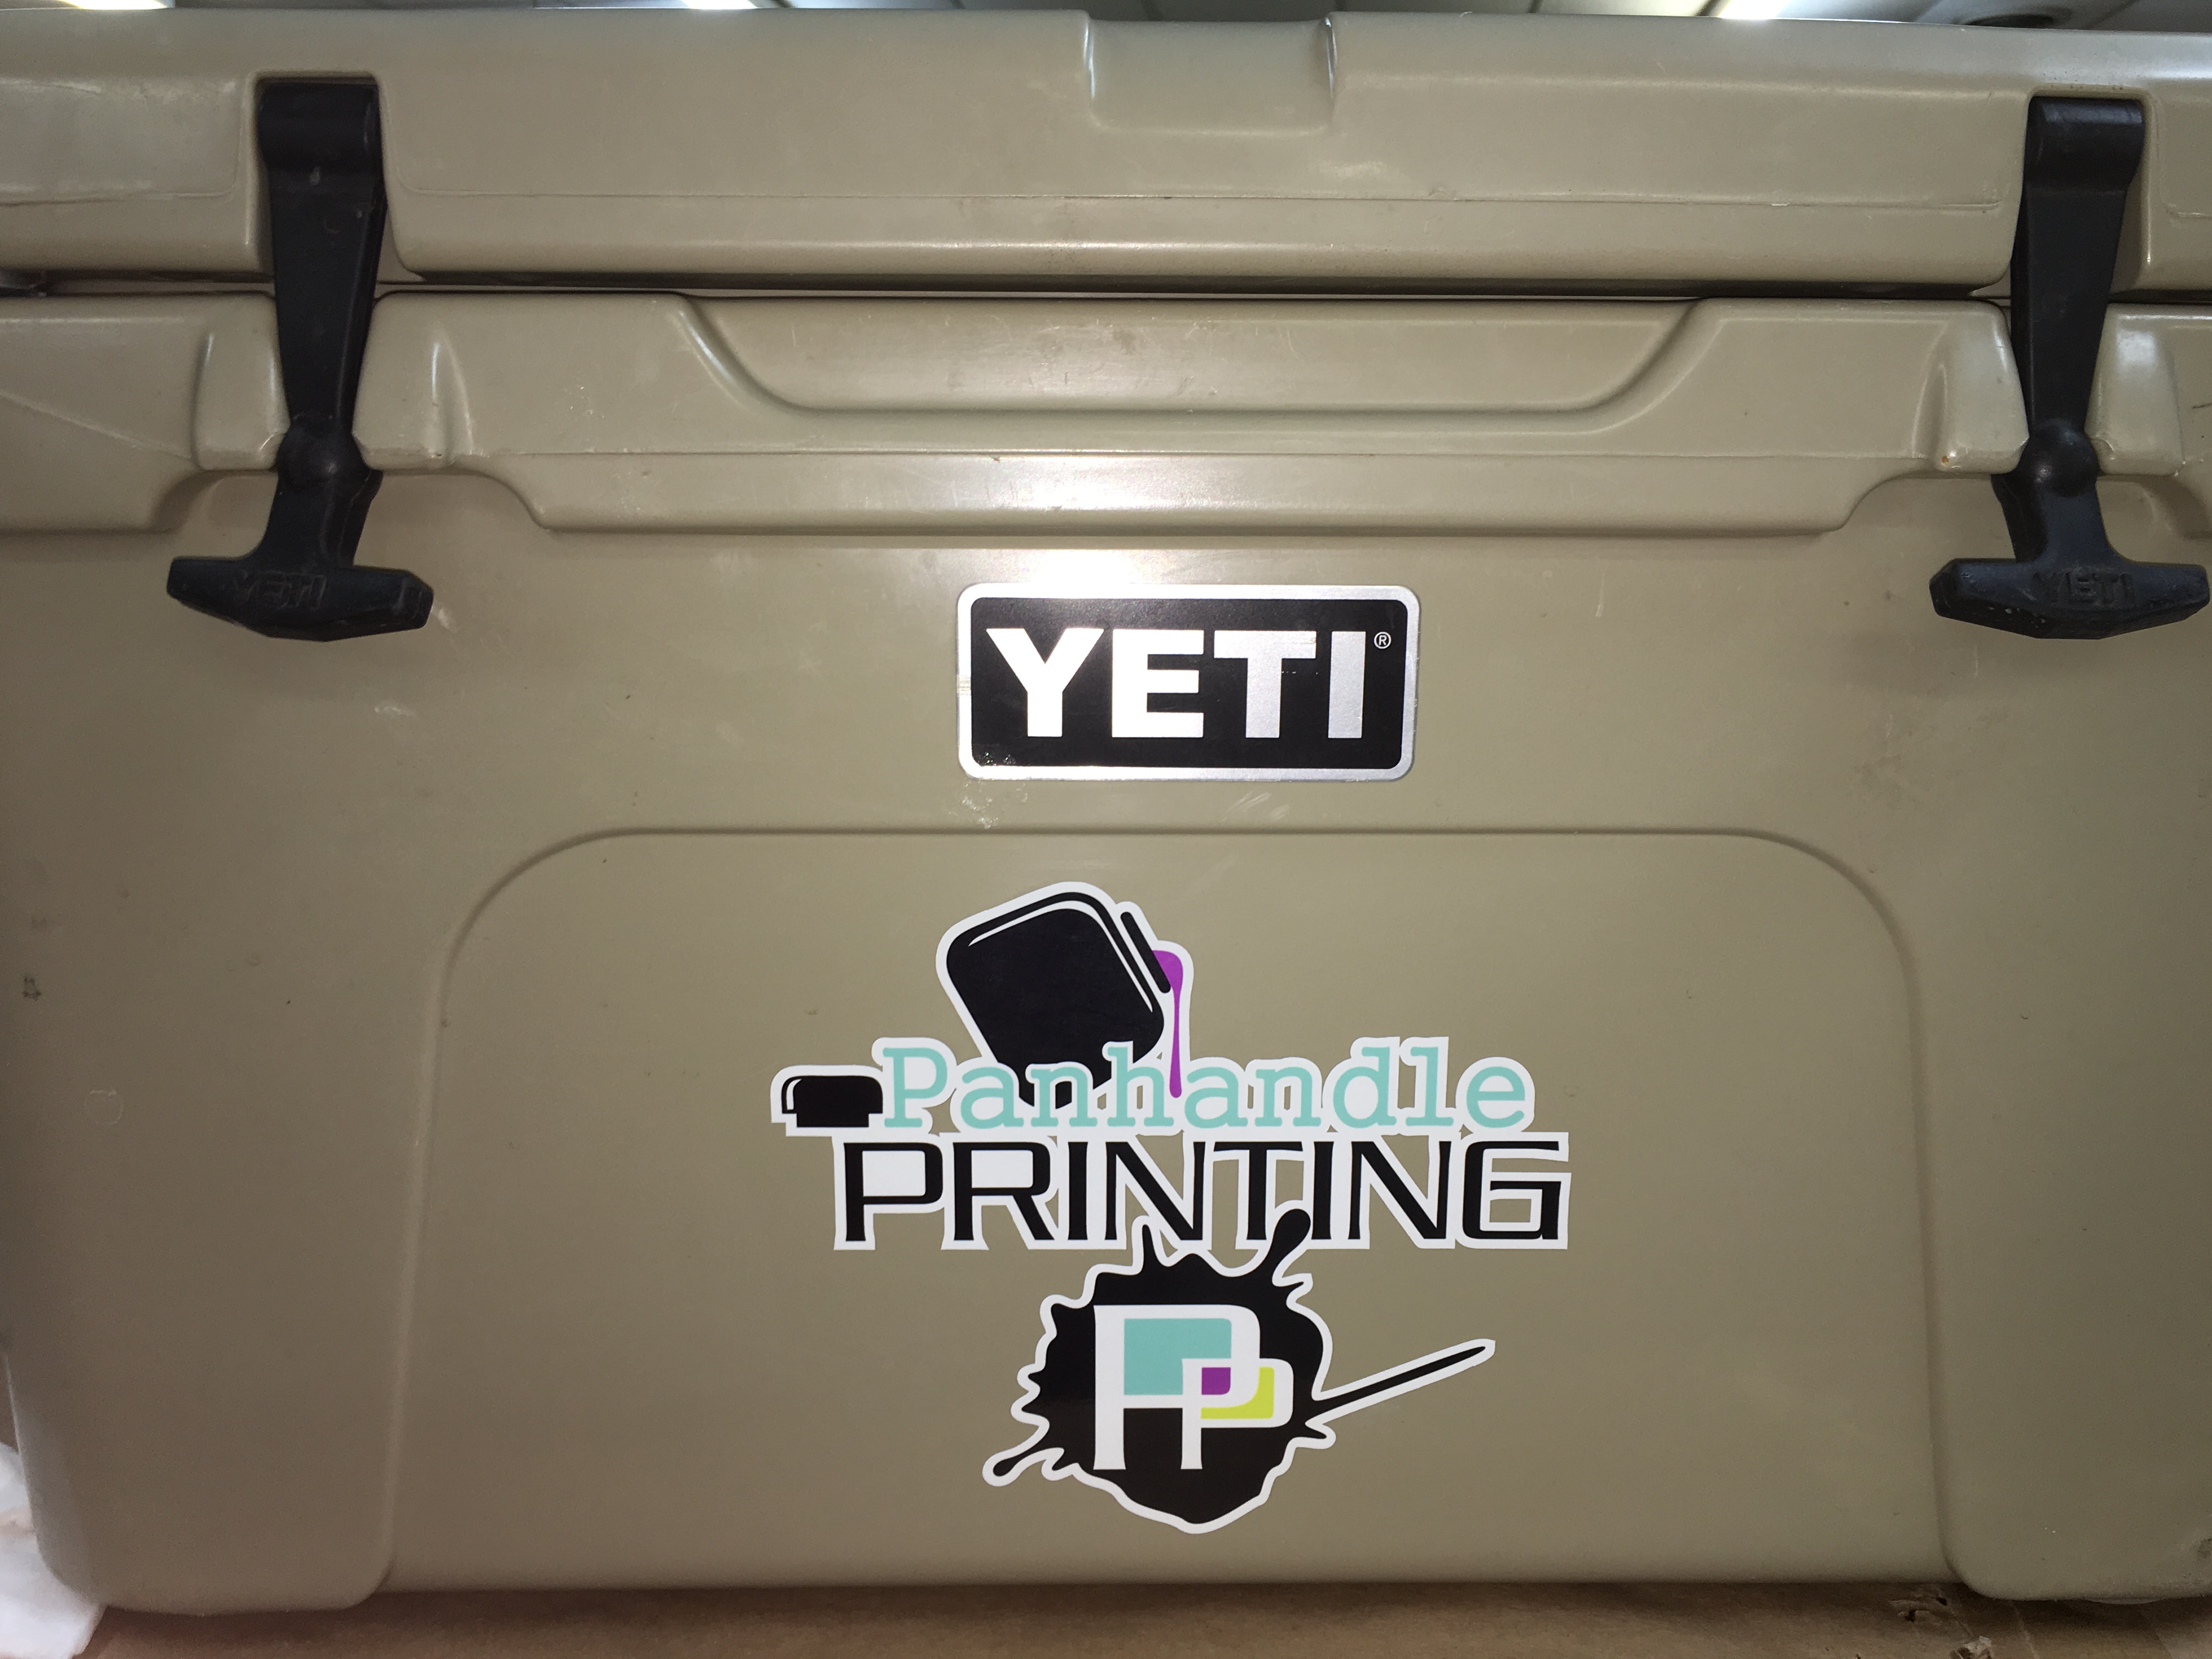 Used our vinyl cutter to cut the material and then sublimated our logo for this amazing decal!